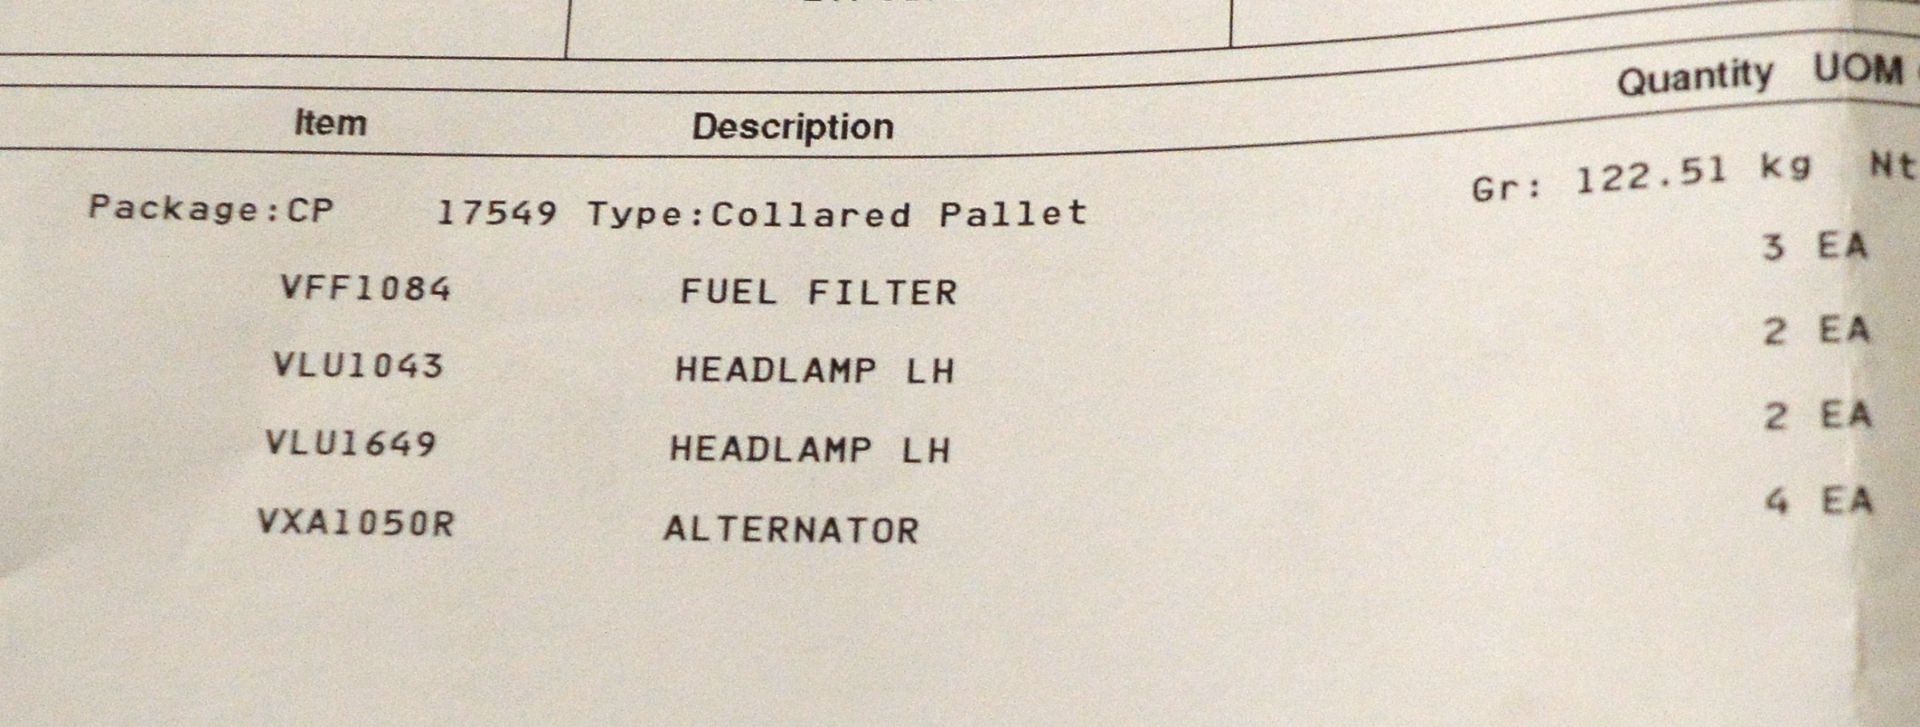 Vehicle parts - alternators, LH headlamps, fuel filters, adhesive - see picture for itiner - Image 7 of 7